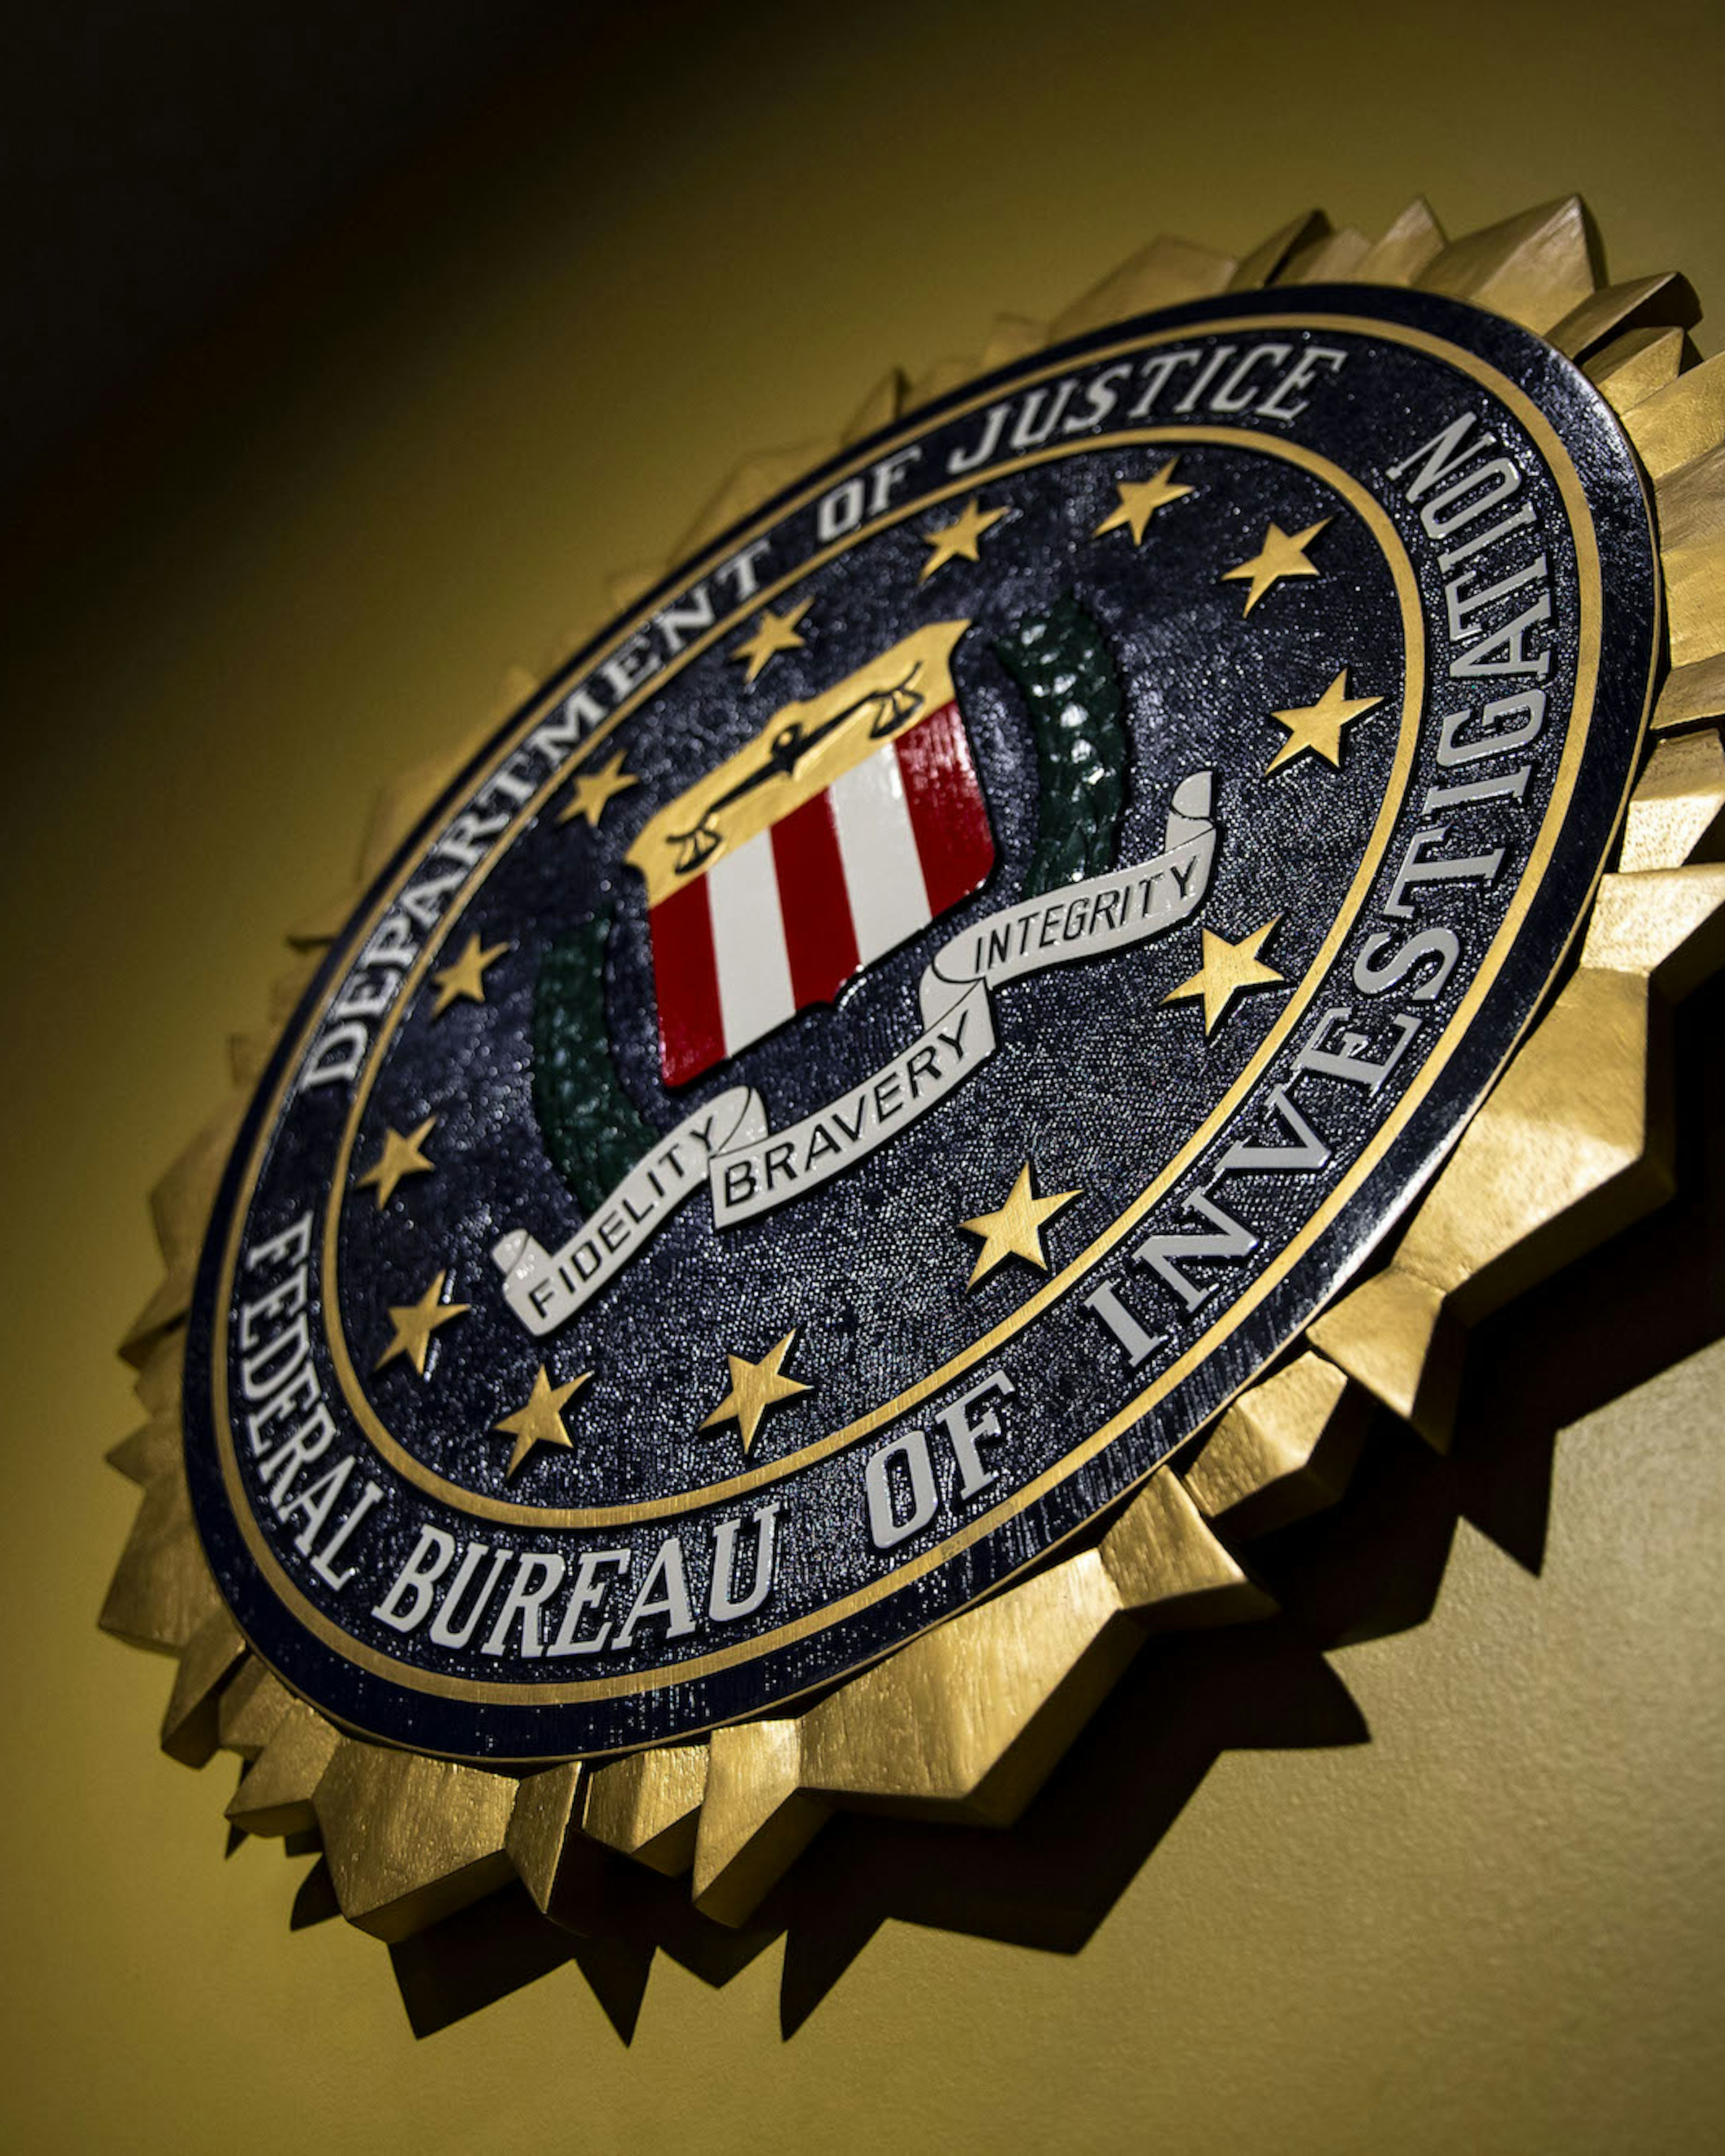 The seal of the Federal Bureau of Investigation (FBI) hangs on a wall before a news conference at the FBI headquarters in Washington, D.C.